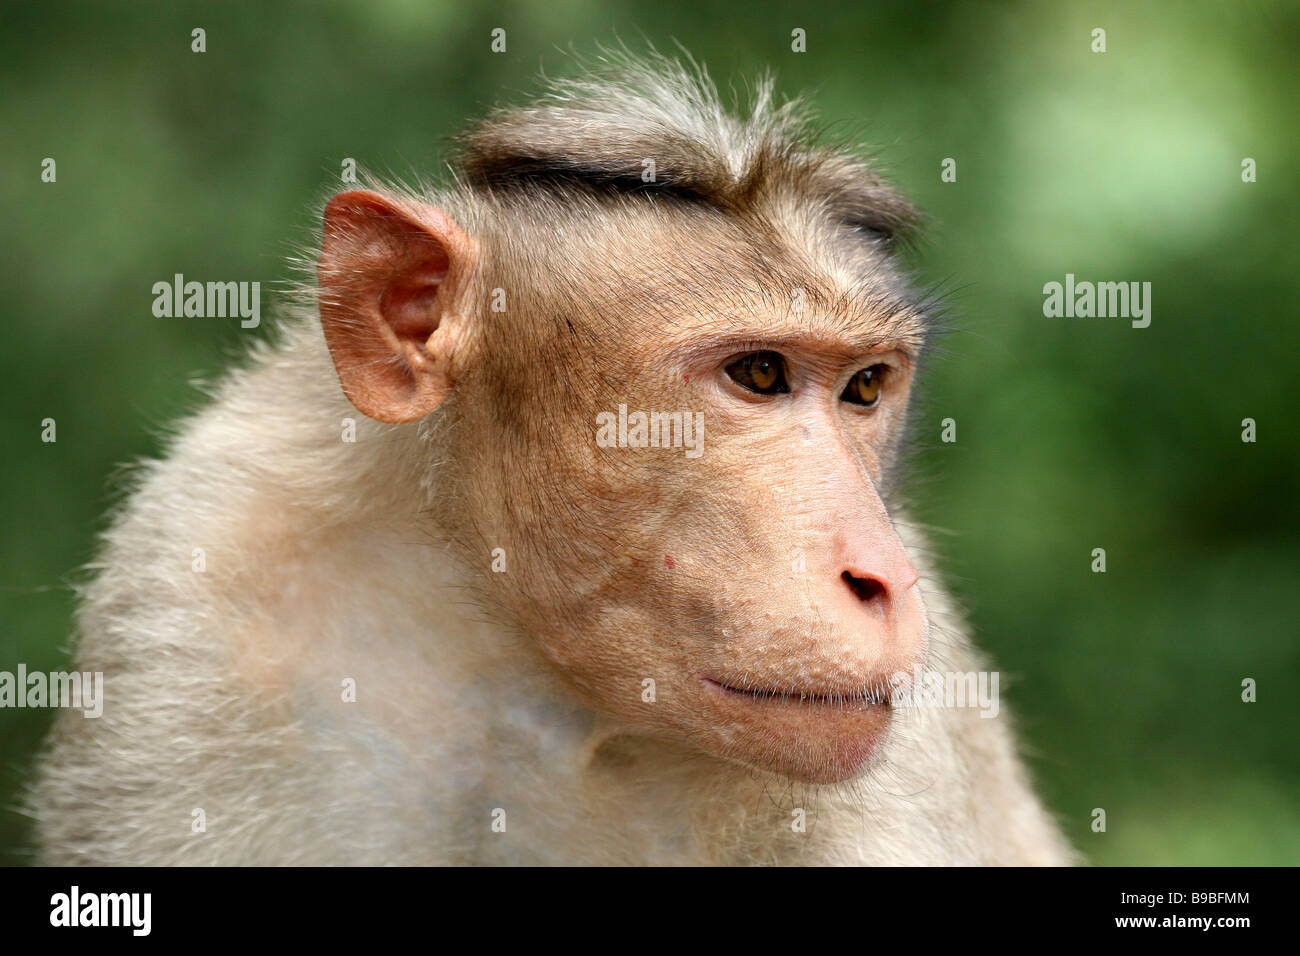 Portrait Of Male Bonnet Macaque Macaca radiata Staring With Concentration Taken In Chinnar Wildlife Sanctuary, Kerala, India Stock Photo